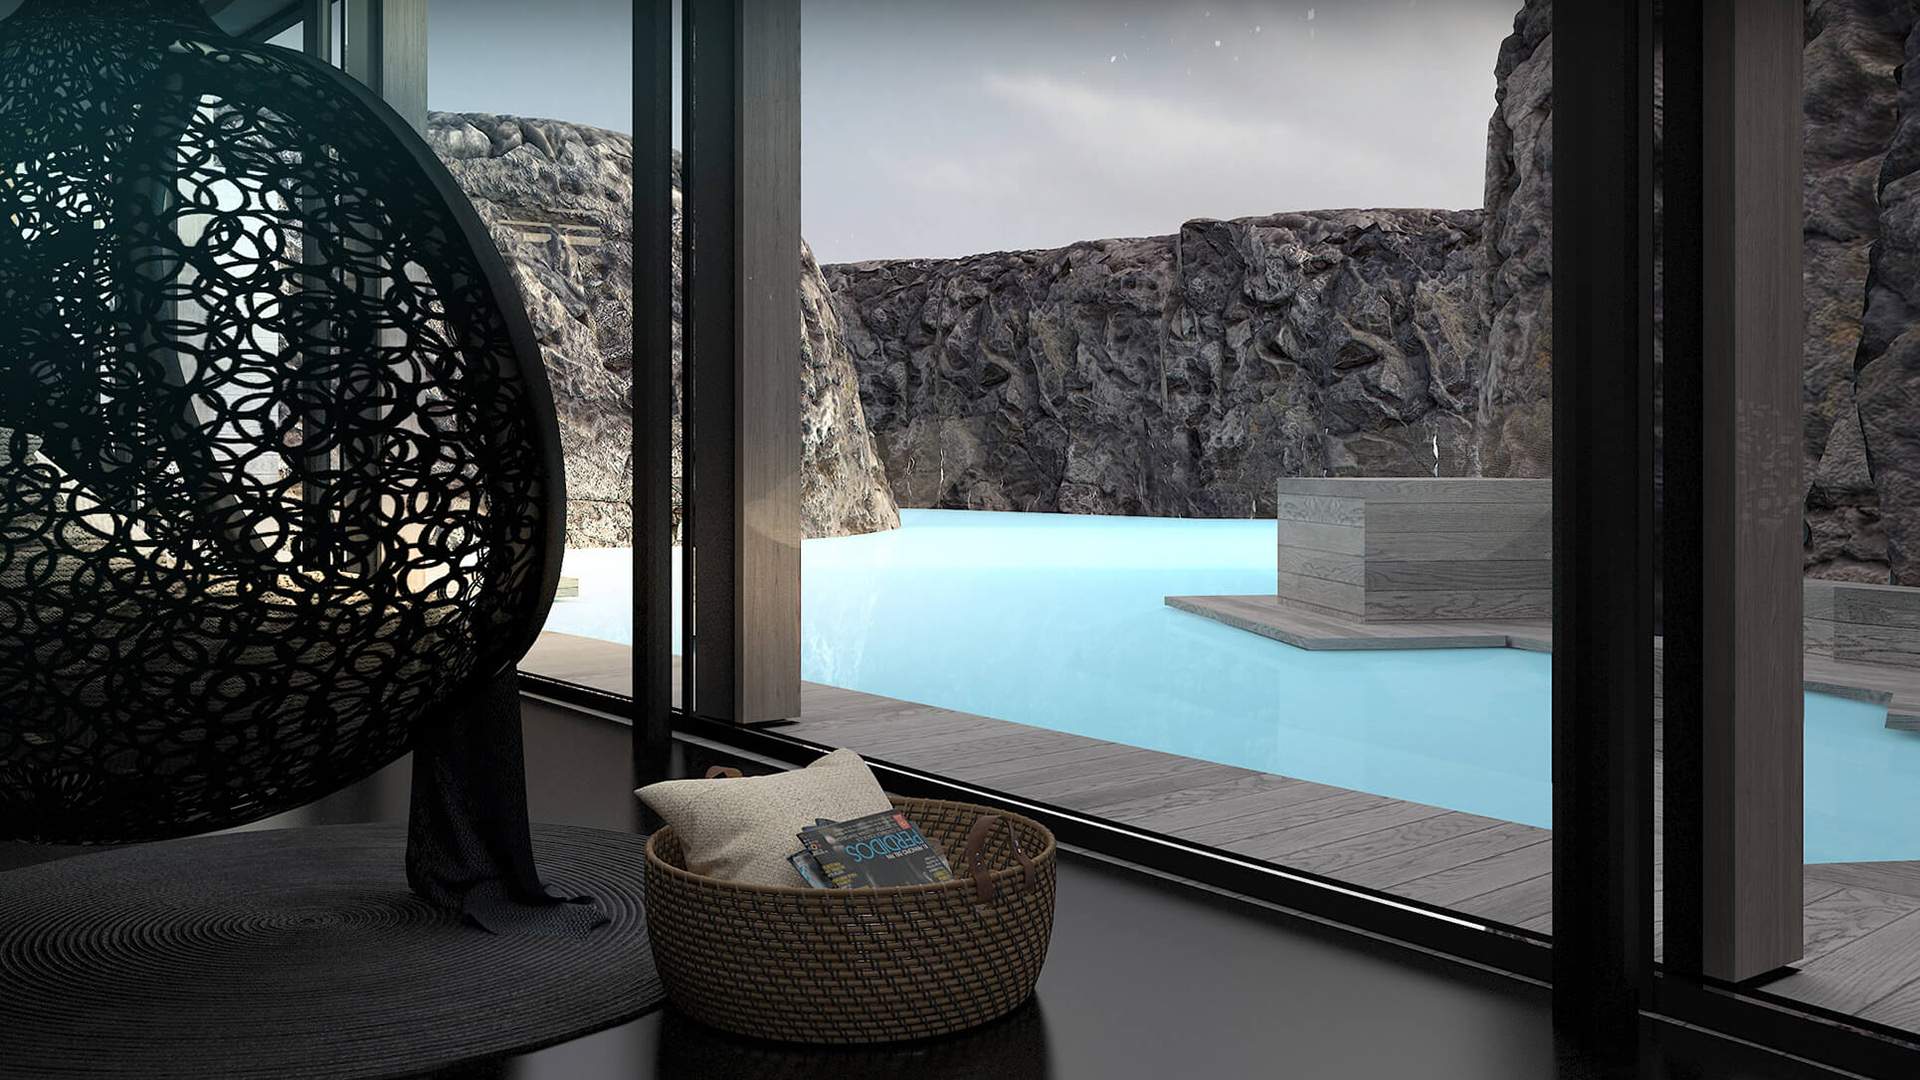 You'll Soon Be Able to Stay at Iceland's Geothermal Blue Lagoon